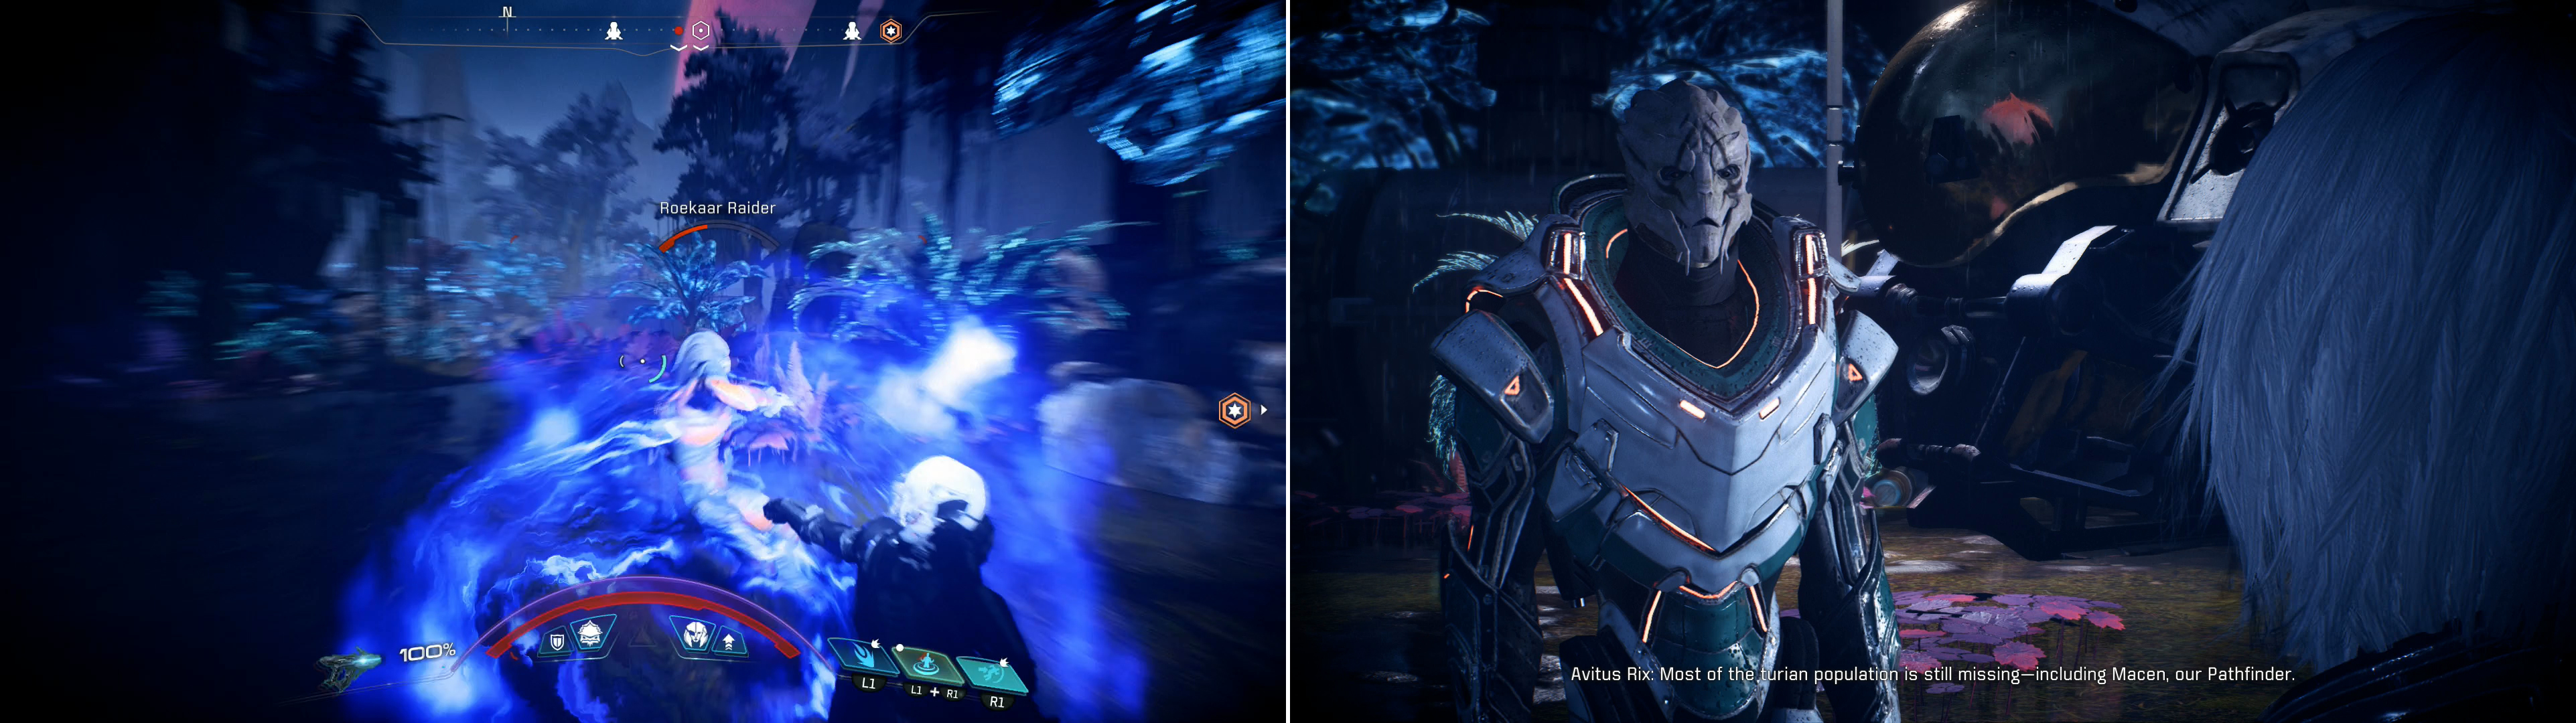 Fend off the Roekaar attacking the Turian camp (left) then talk to Avitus Rix (right) to learn what he knows of the Turian Ark's fate.